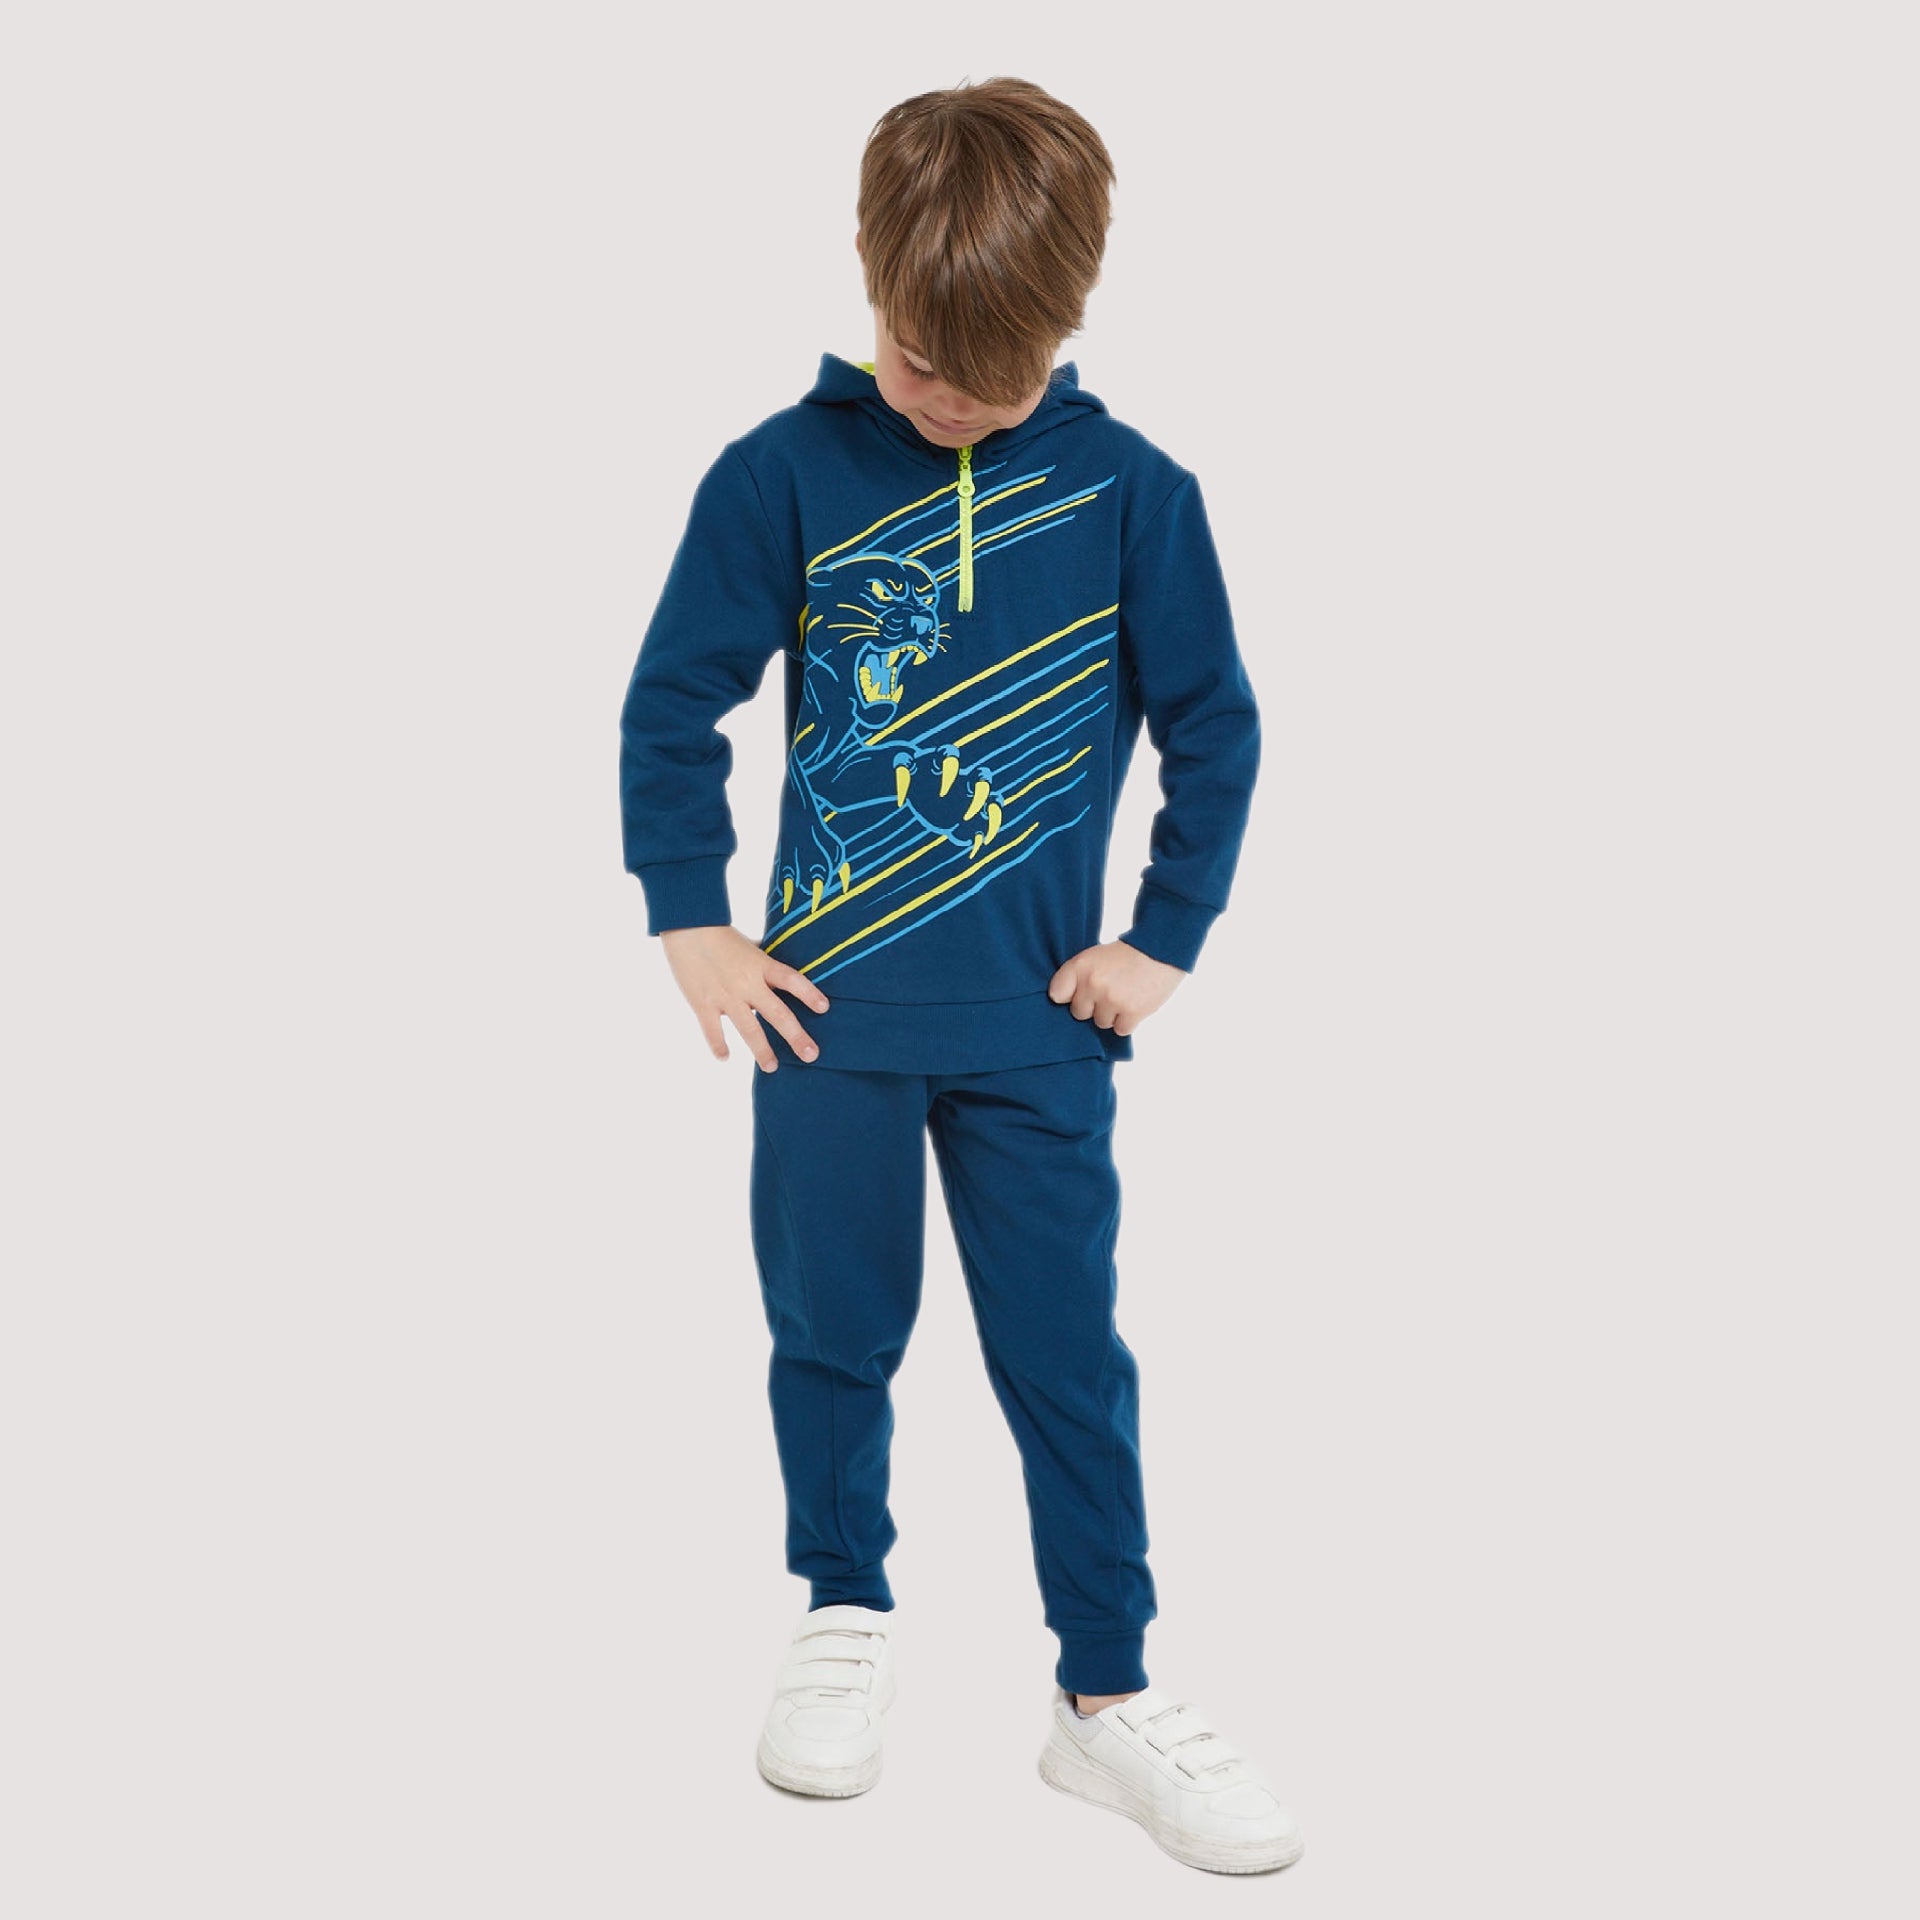 Tiger Blue Tracksuit Set - Tiger Blue Tracksuit Set - 9-10 Years - Rolypoly - Melymod